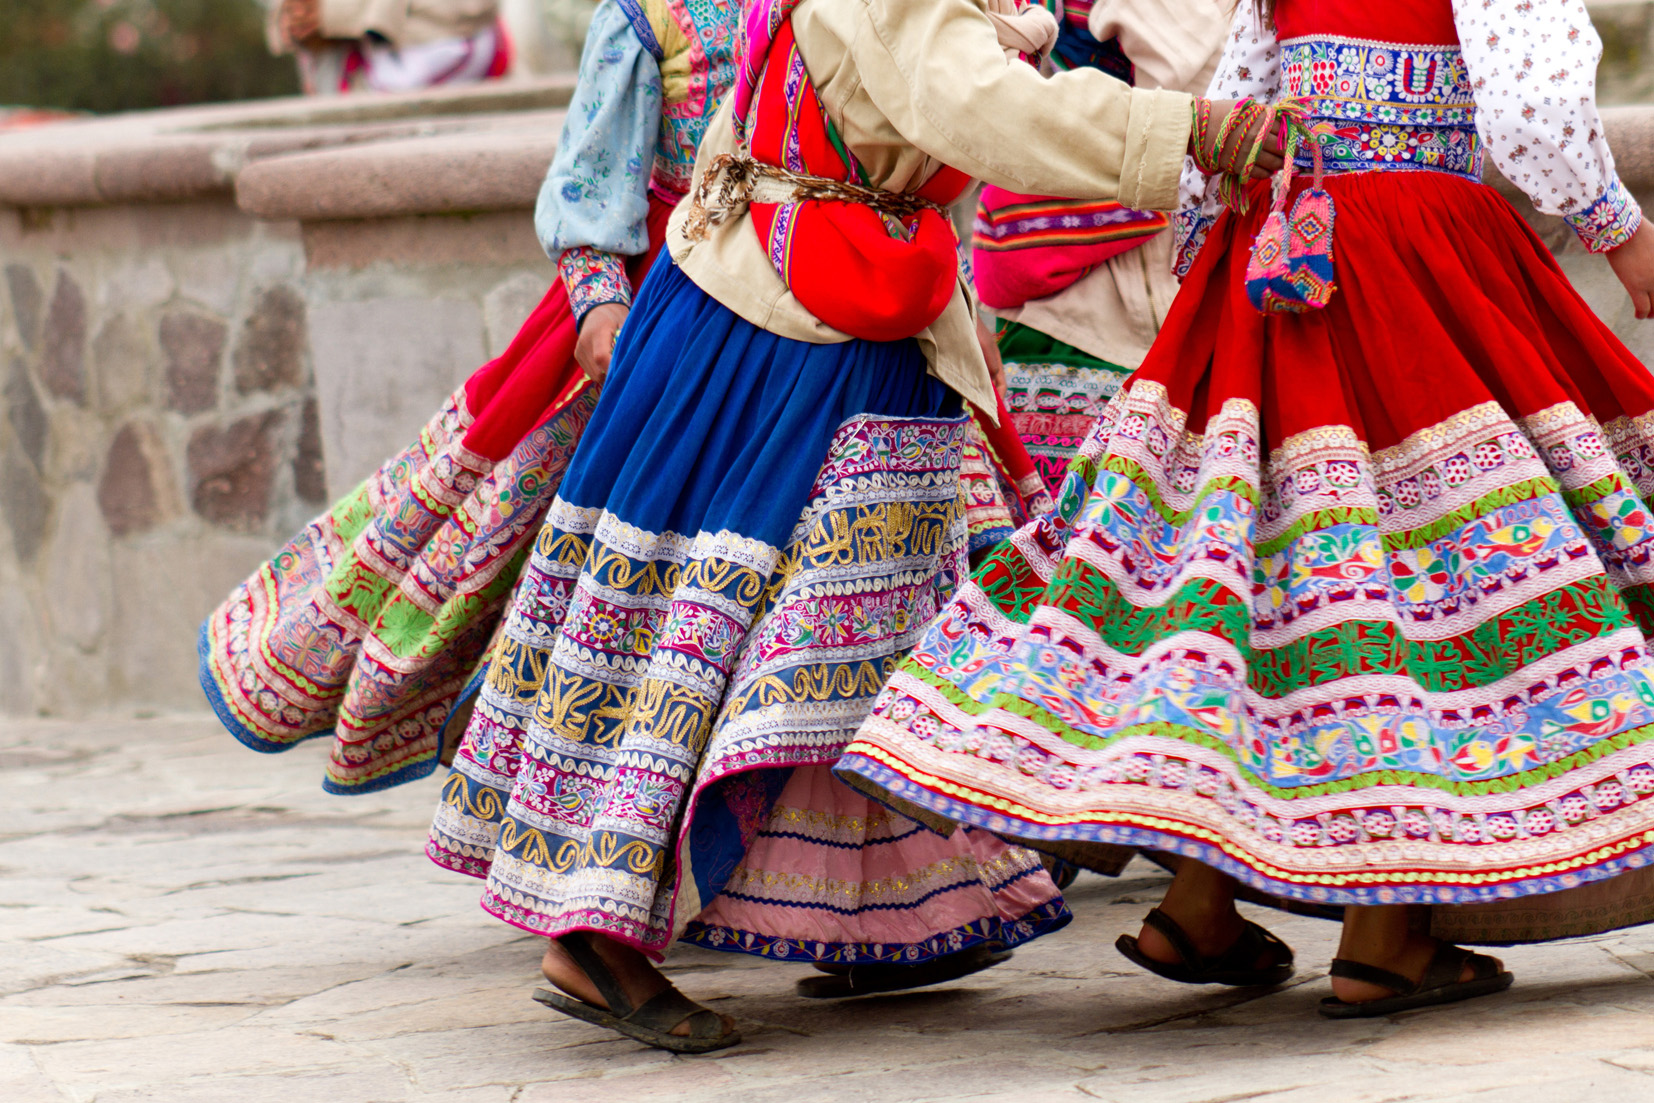 The world’s most authentic cultural traditions